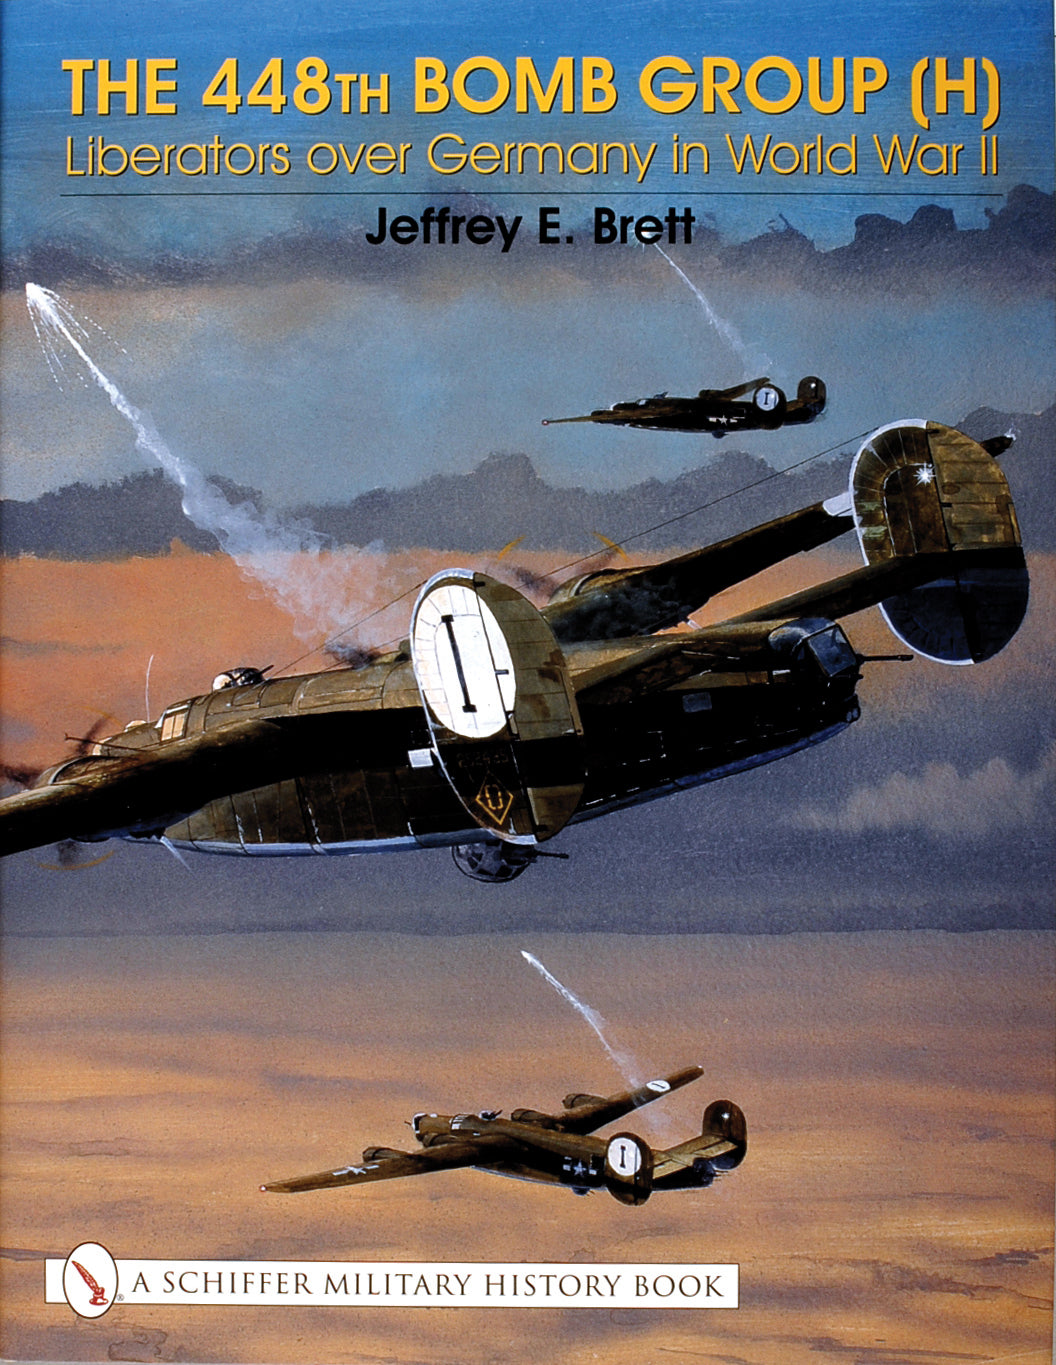 The 448th Bomb Group (H):